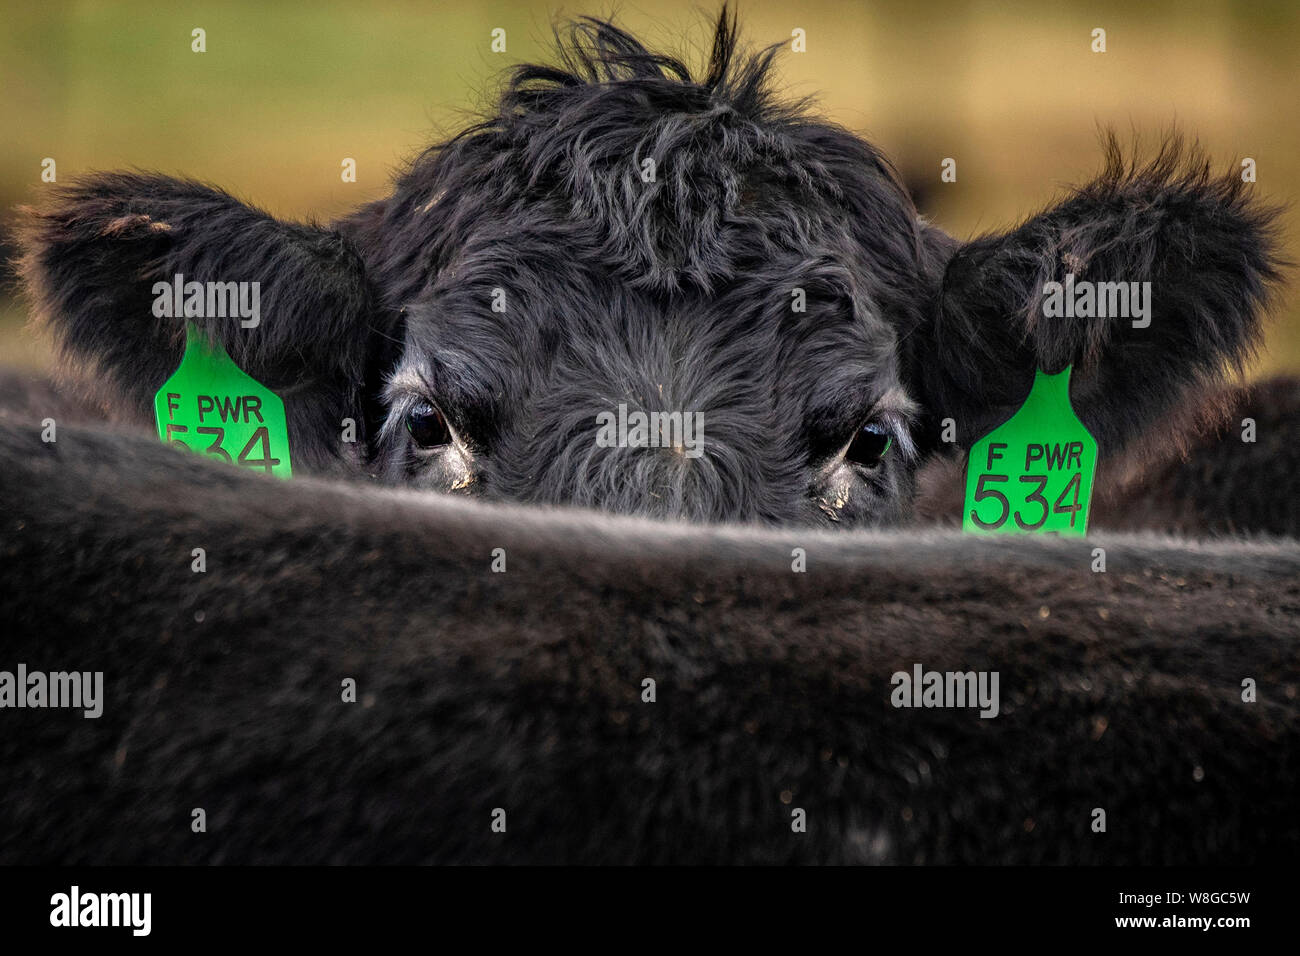 Eyes of a black angus cow sneaking a peek at a camera, green identification tags on her ears Stock Photo